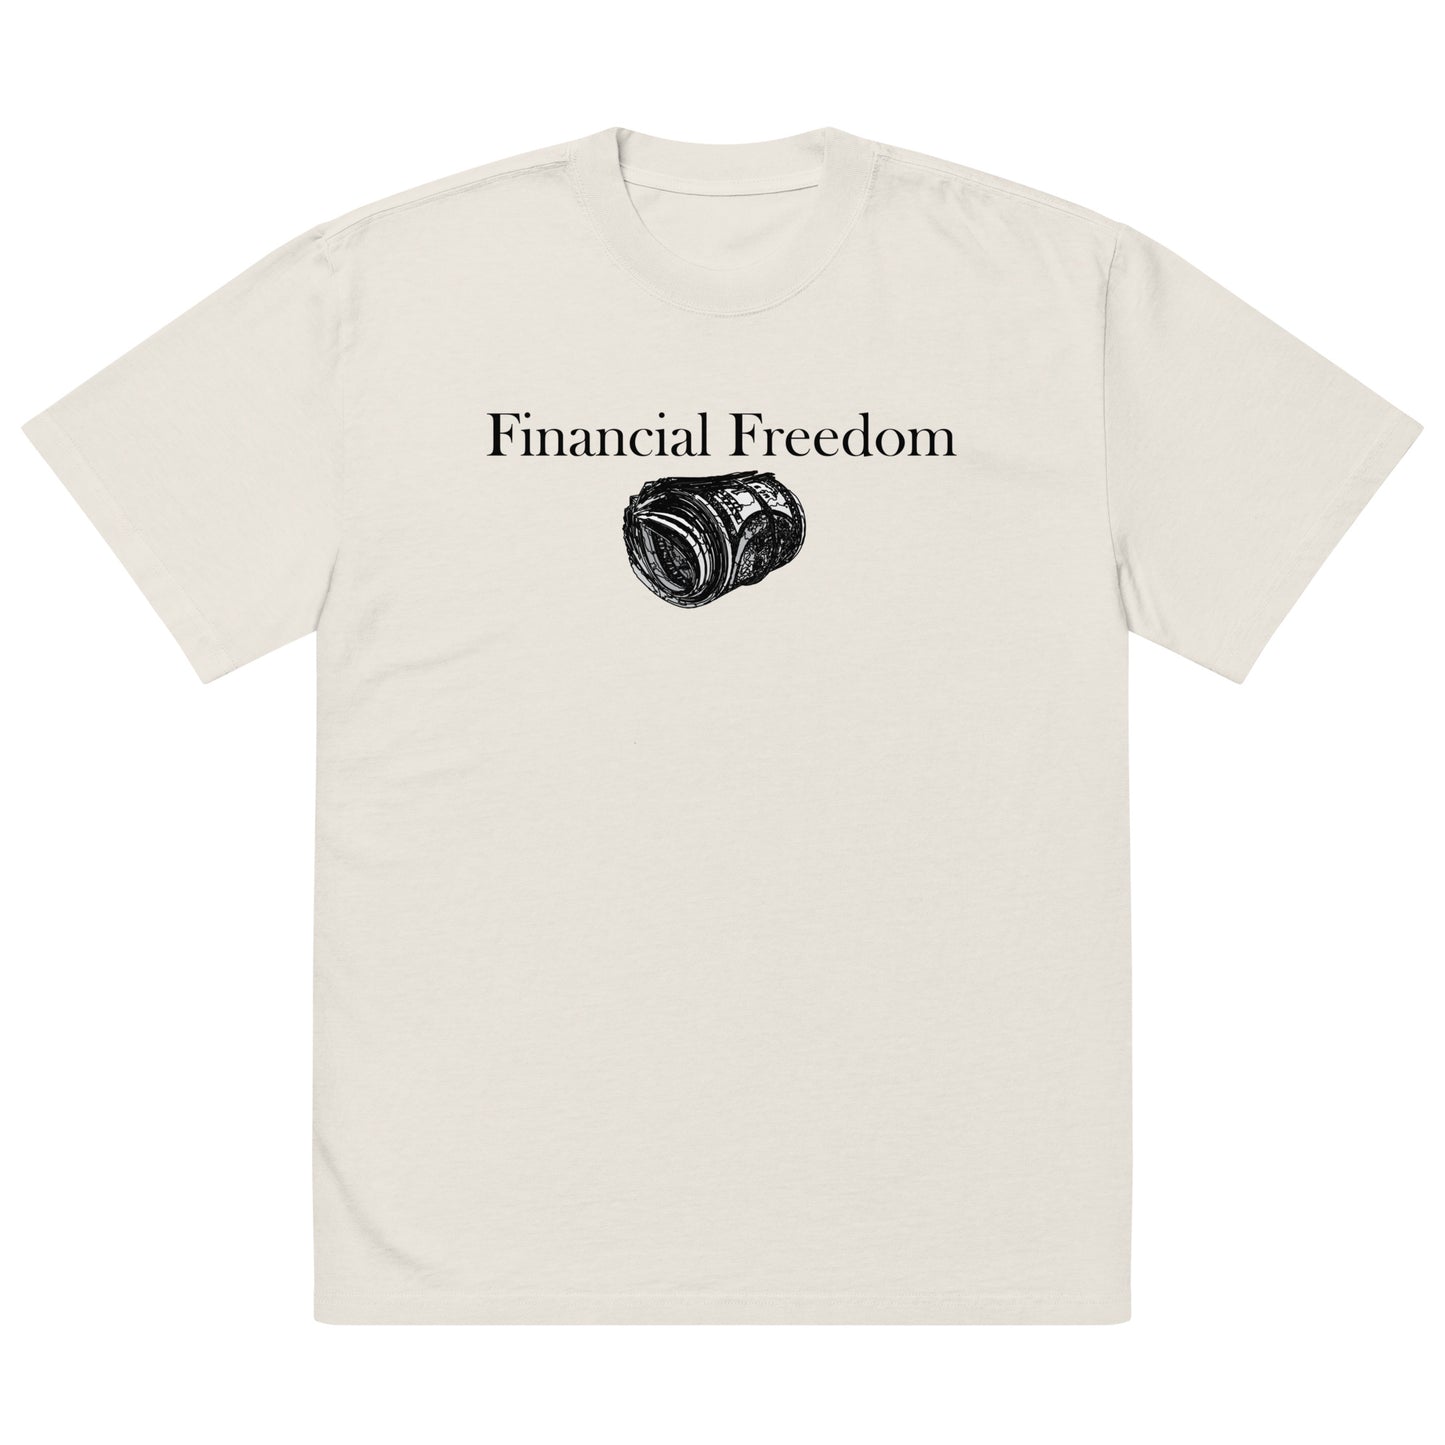 2 F's Given ( Financial Freedom ) T-Shirt